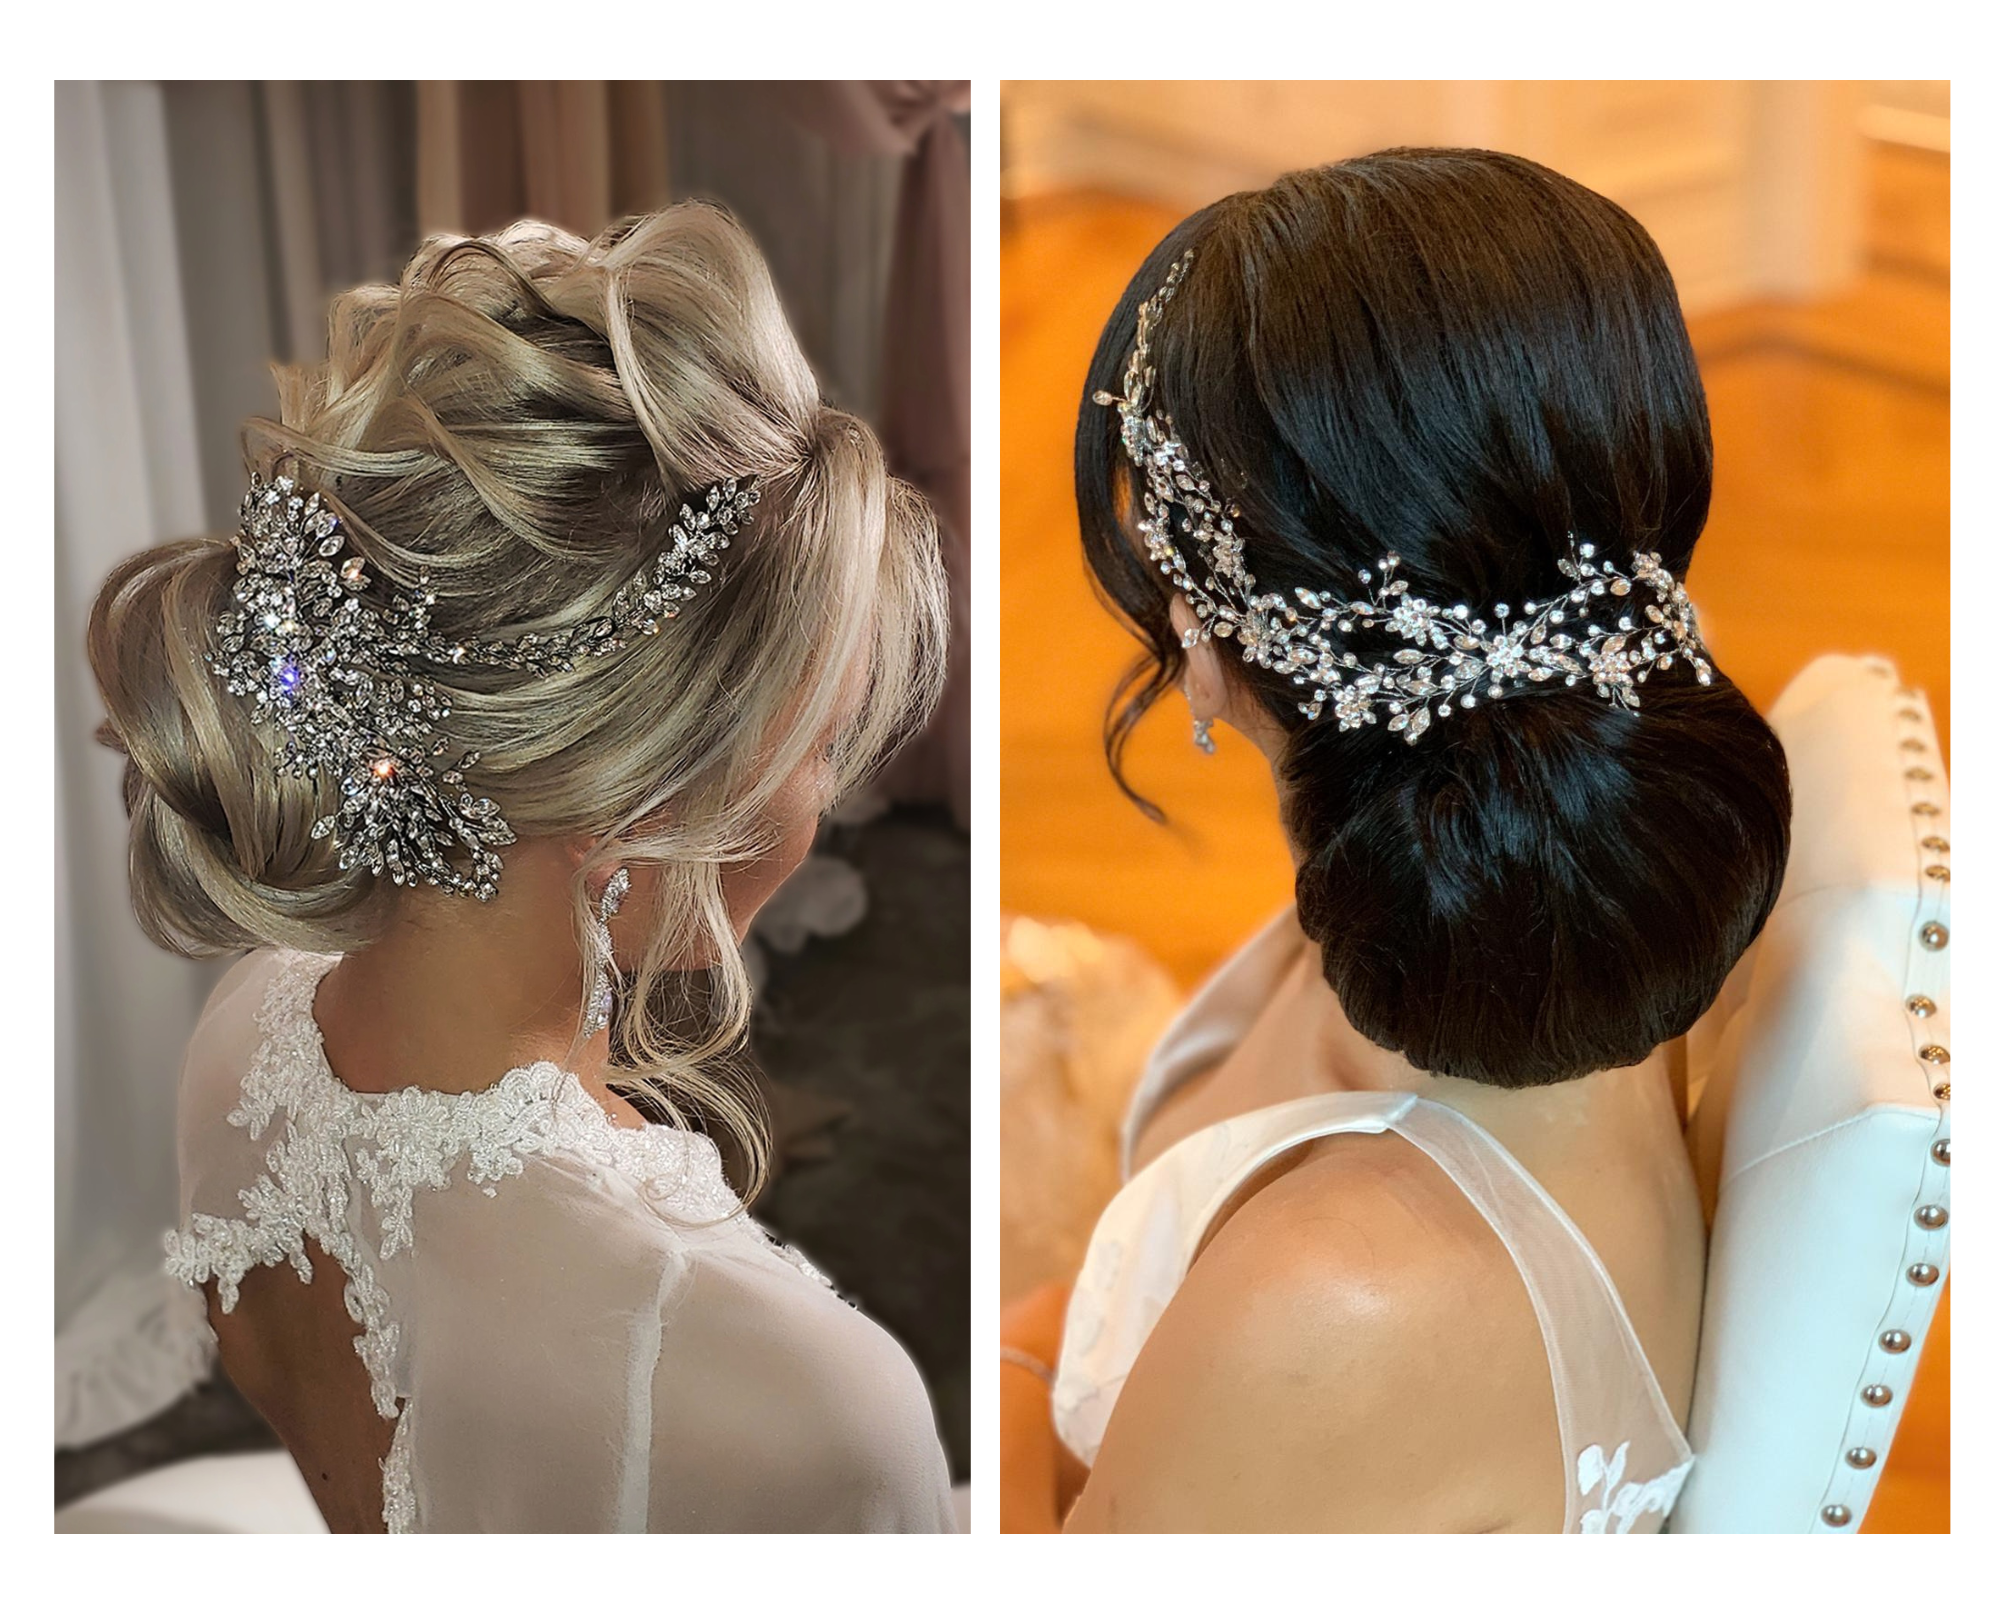 Low bridal buns styled with sparkling crystal halo hair vines with a back accent.